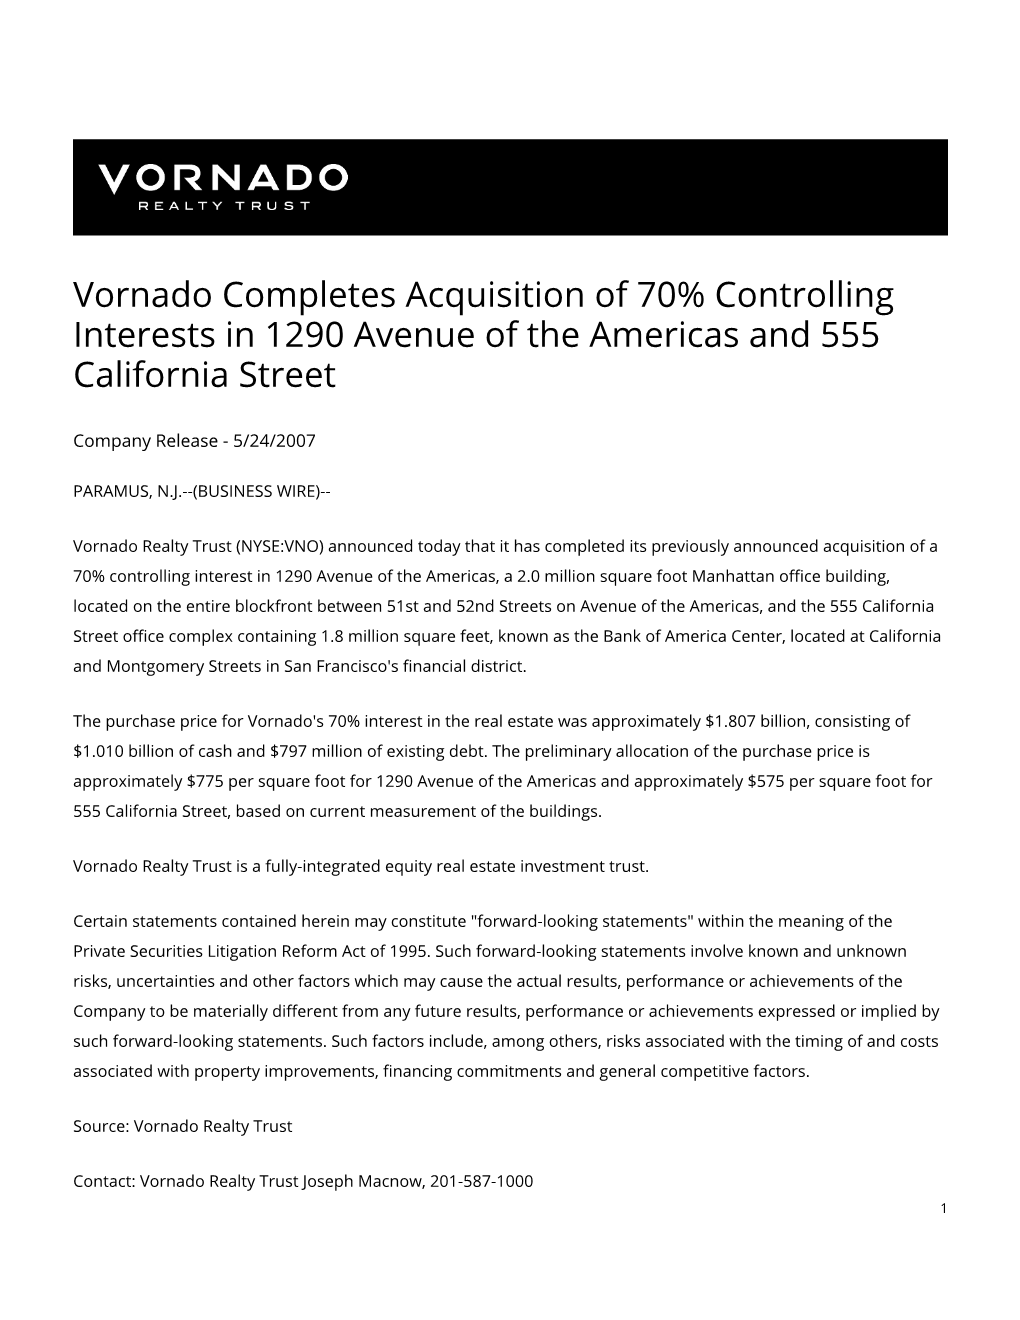 Vornado Completes Acquisition of 70% Controlling Interests in 1290 Avenue of the Americas and 555 California Street